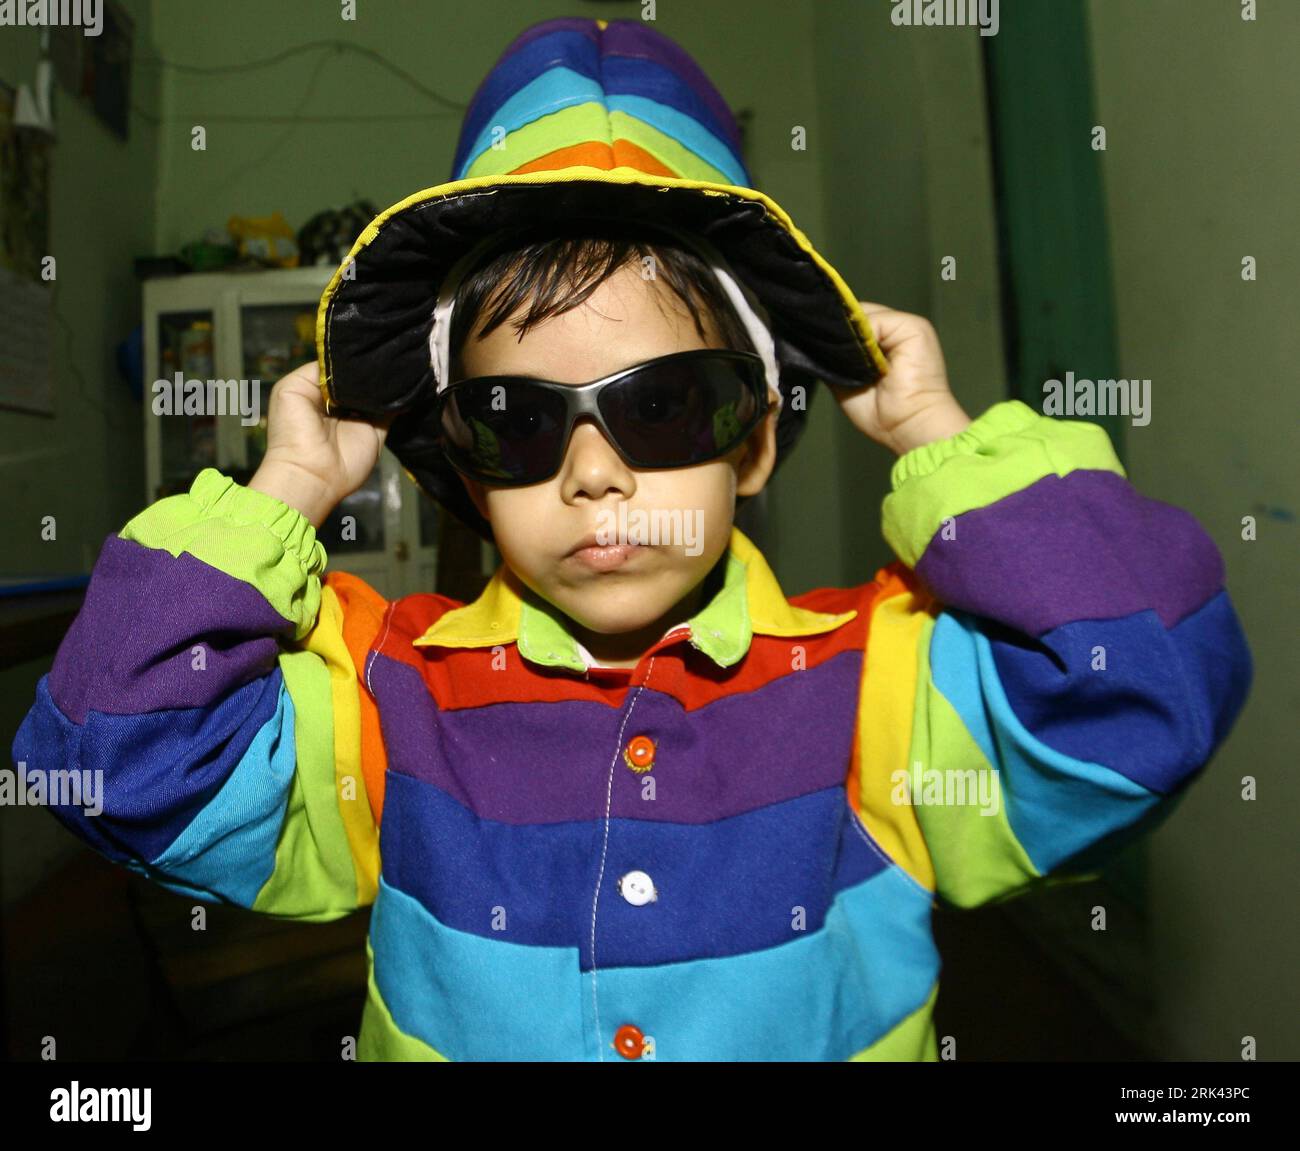 Bildnummer: 53584912  Datum: 30.10.2009  Copyright: imago/Xinhua (091107) -- BARQUISIMETO, Nov. 7, 2009 (Xinhua) -- Jose Manuel Sanchez Aguero, a five-year-old boy, dresses up to perform magic at home in Barquisimeto, Venezuela, Oct. 30, 2009. Jose s father Miguel Angel Sanchez is a technician and a part-time host for children s parties, which sets a good example to his son. Although quiet and shy in class, Jose now has learnt to perform magic and dancing in children s parties. Michael Jackson is Jose s favorite idol and he is quite up on imitating the pop star. I ll be as famous as Michael so Stock Photo